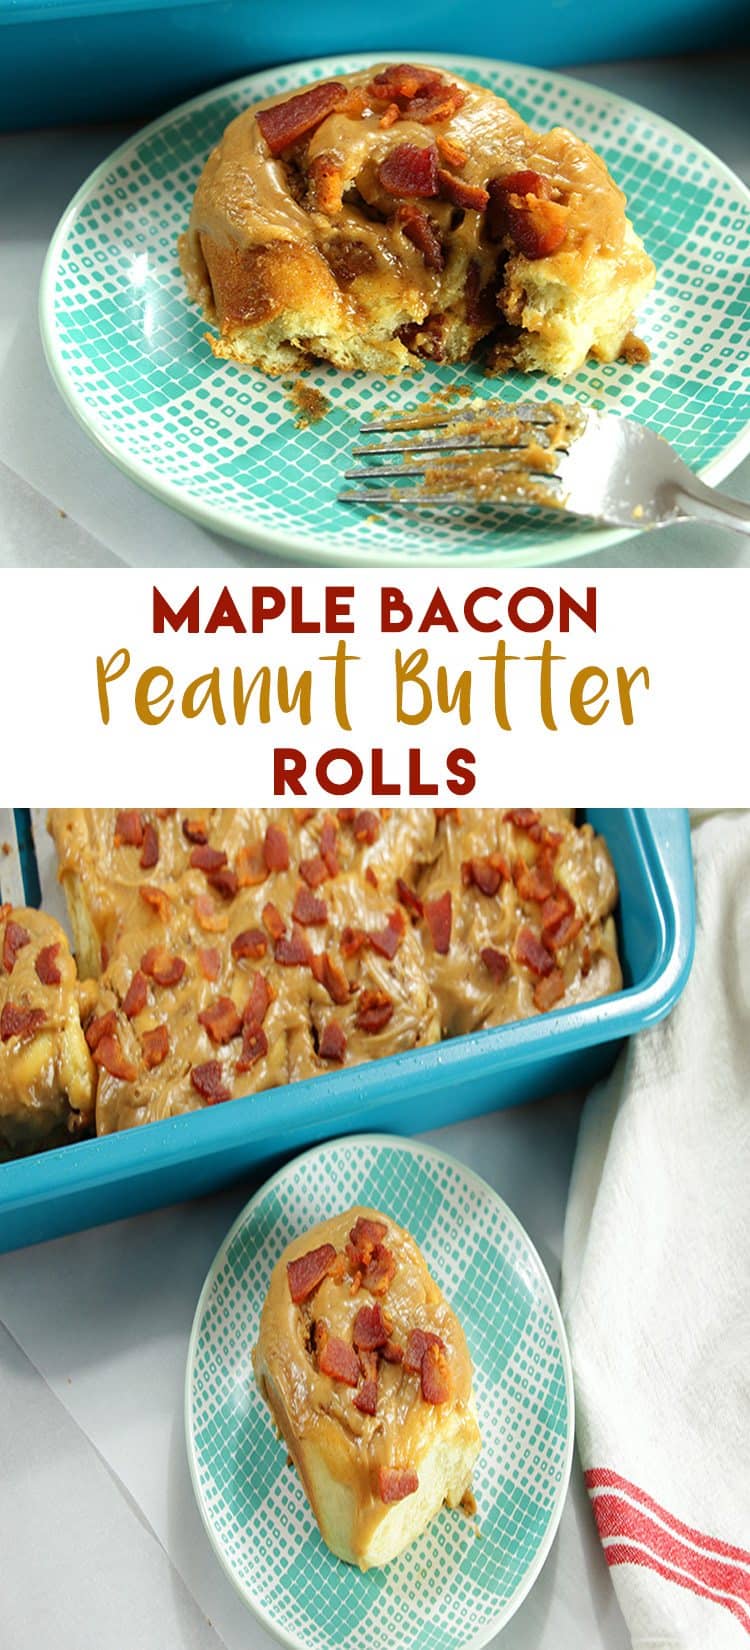 Maple Bacon Peanut Butter Rolls for an easy breakfast roll recipe that is perfect for a holiday morning breakfast or brunch or a sweet treat any day of the year.